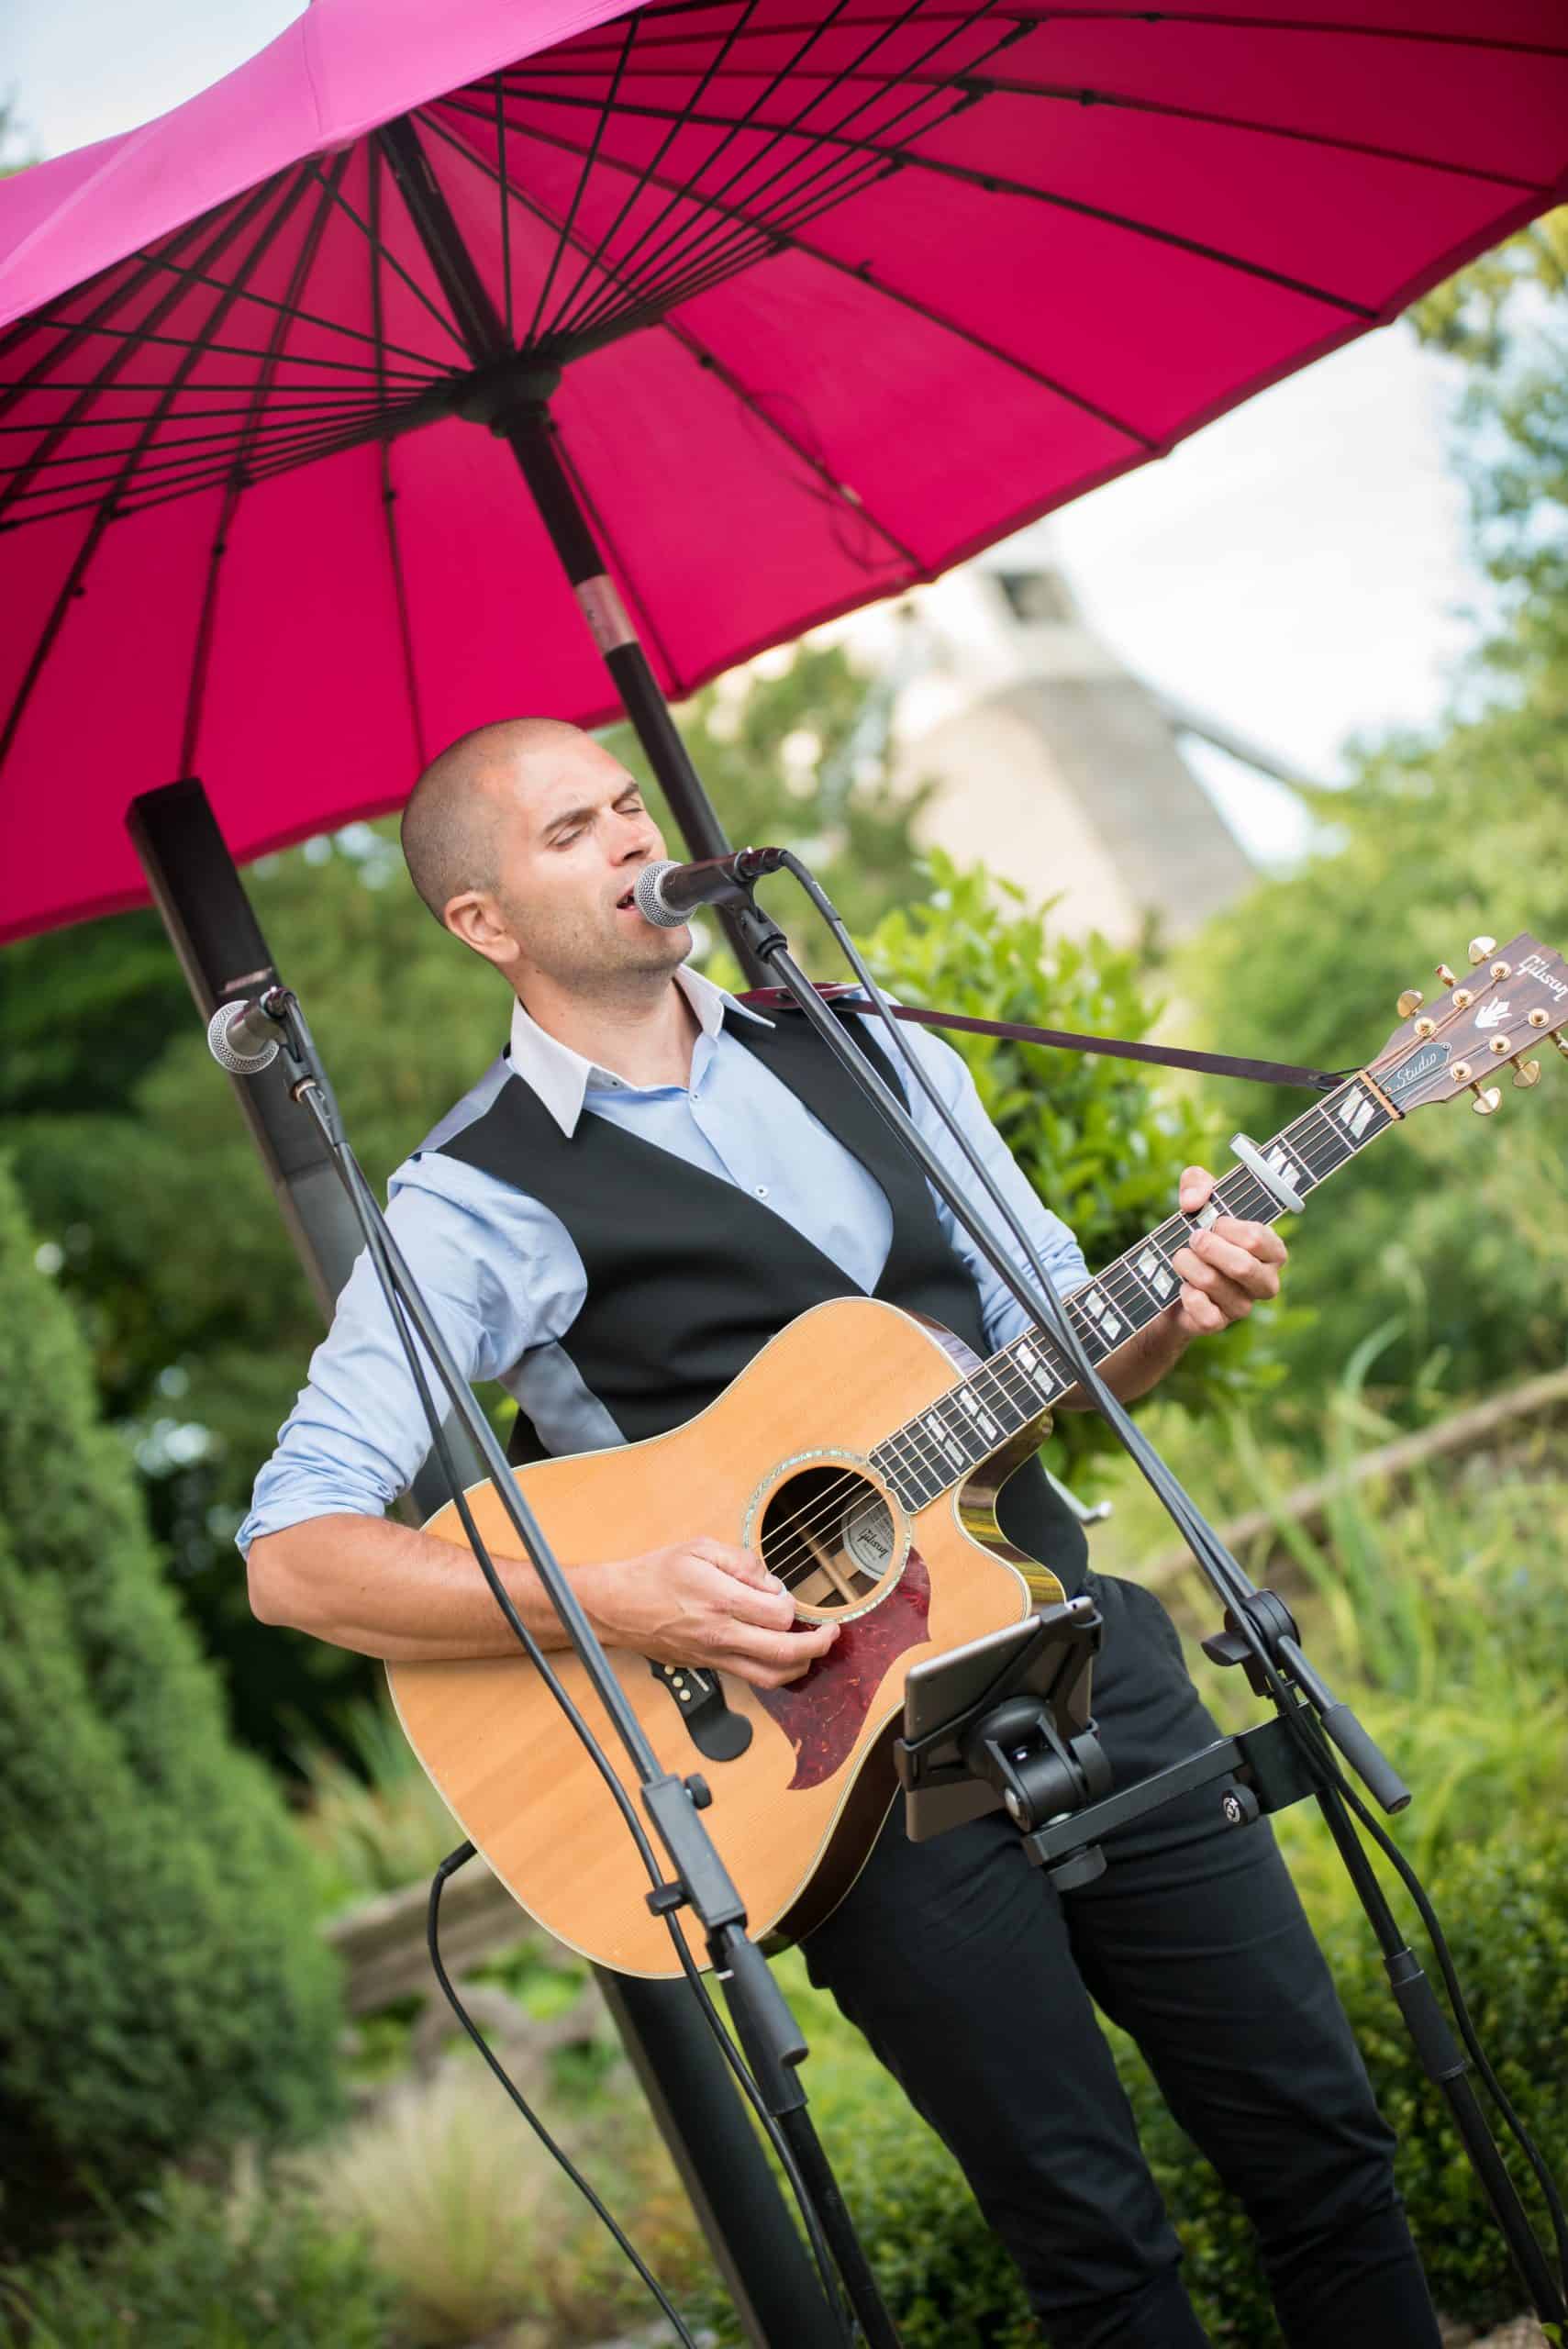 live entertainment at private party at home event planning by Alastair Currie Events